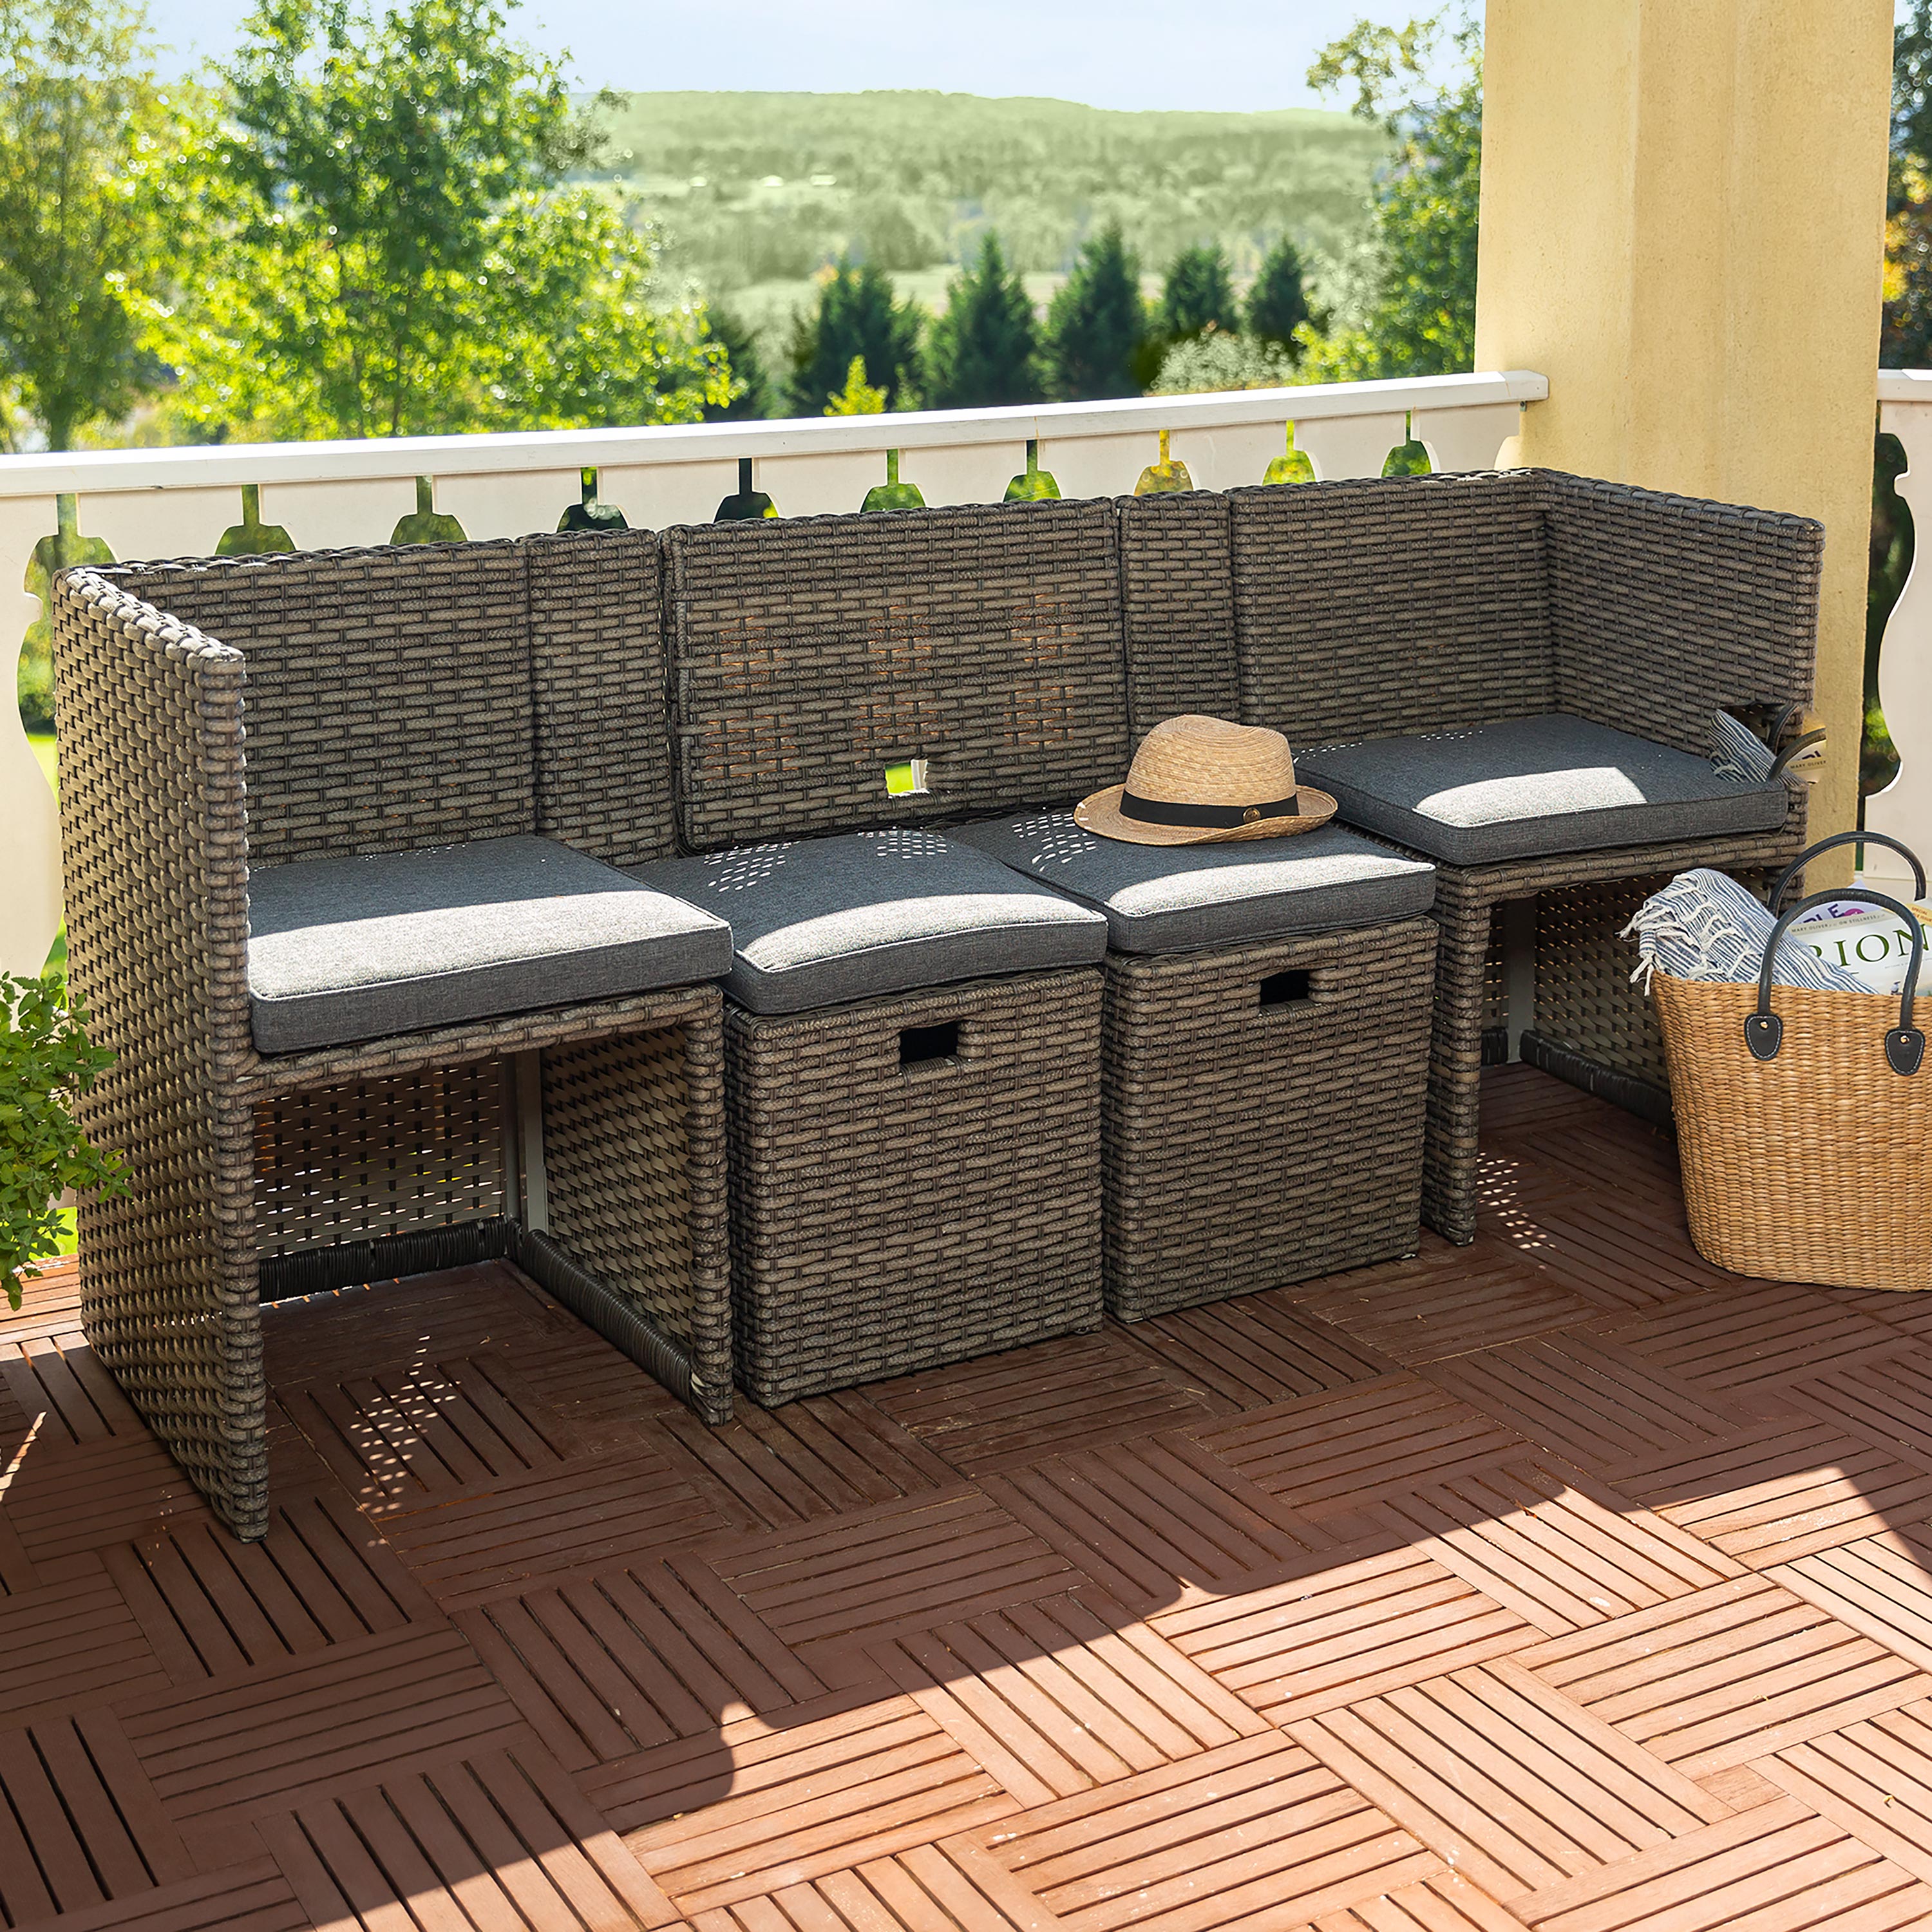 Compact Modular Wicker Seating Set with Multiple Configurations - Antique Brown